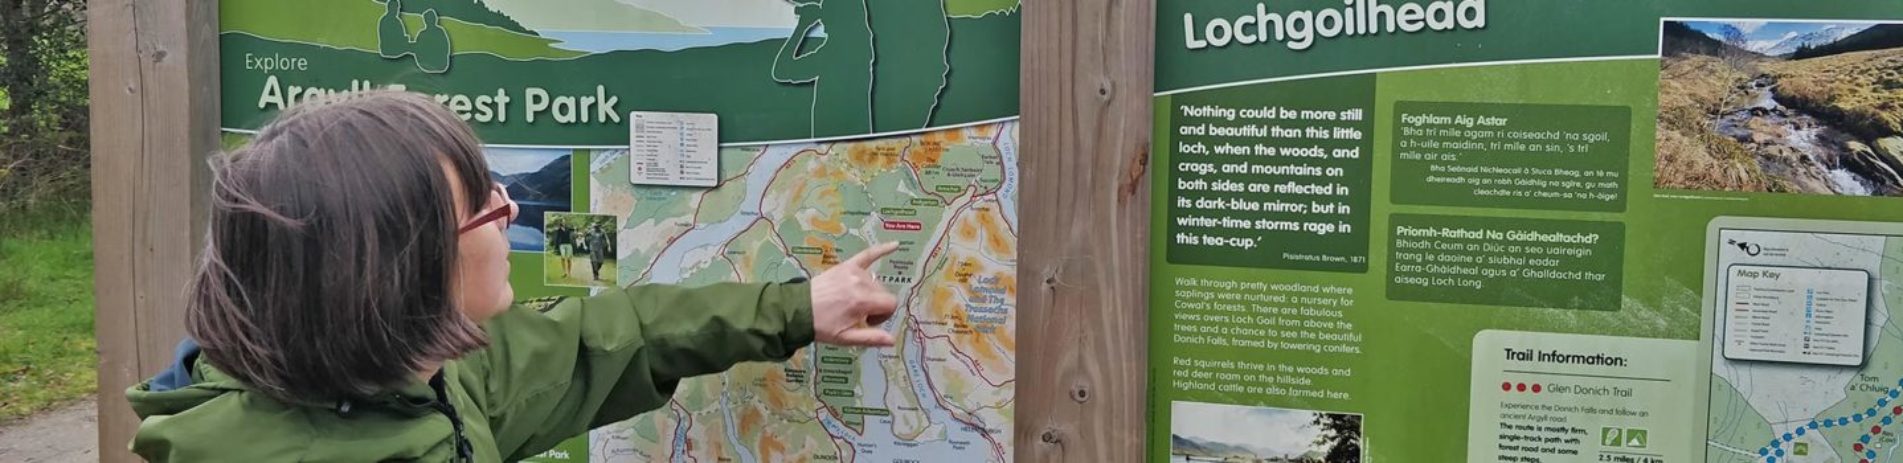 volunteer-ranger-woman-in-green-jacket-pointing-at-forestry-and-land-scotland-board-about-argyll-forest-park-and-lochgoilhead